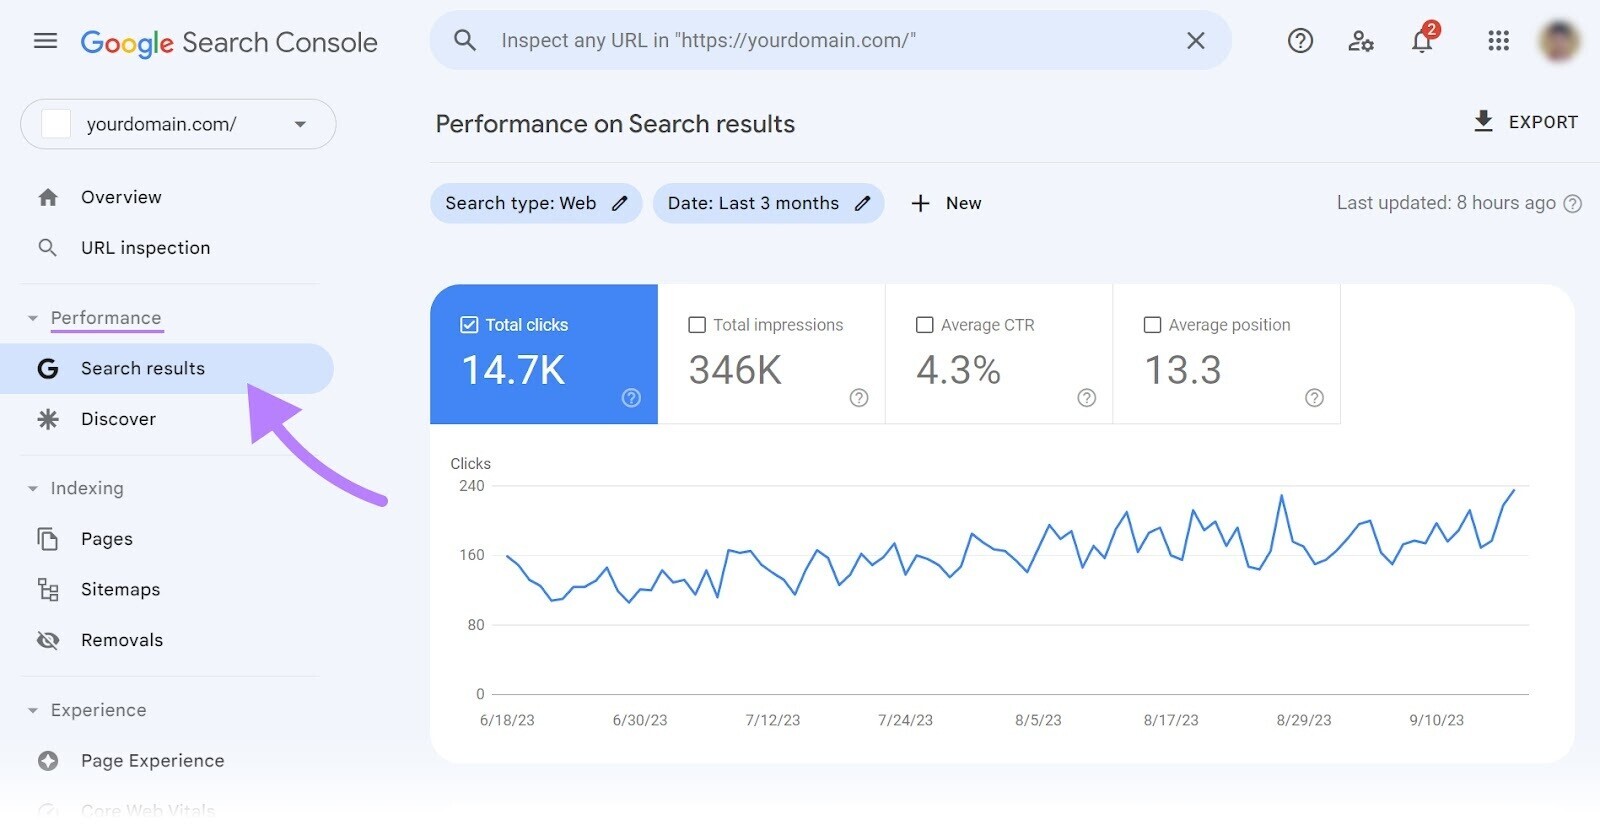 Performance on search results graph in Google Search Console